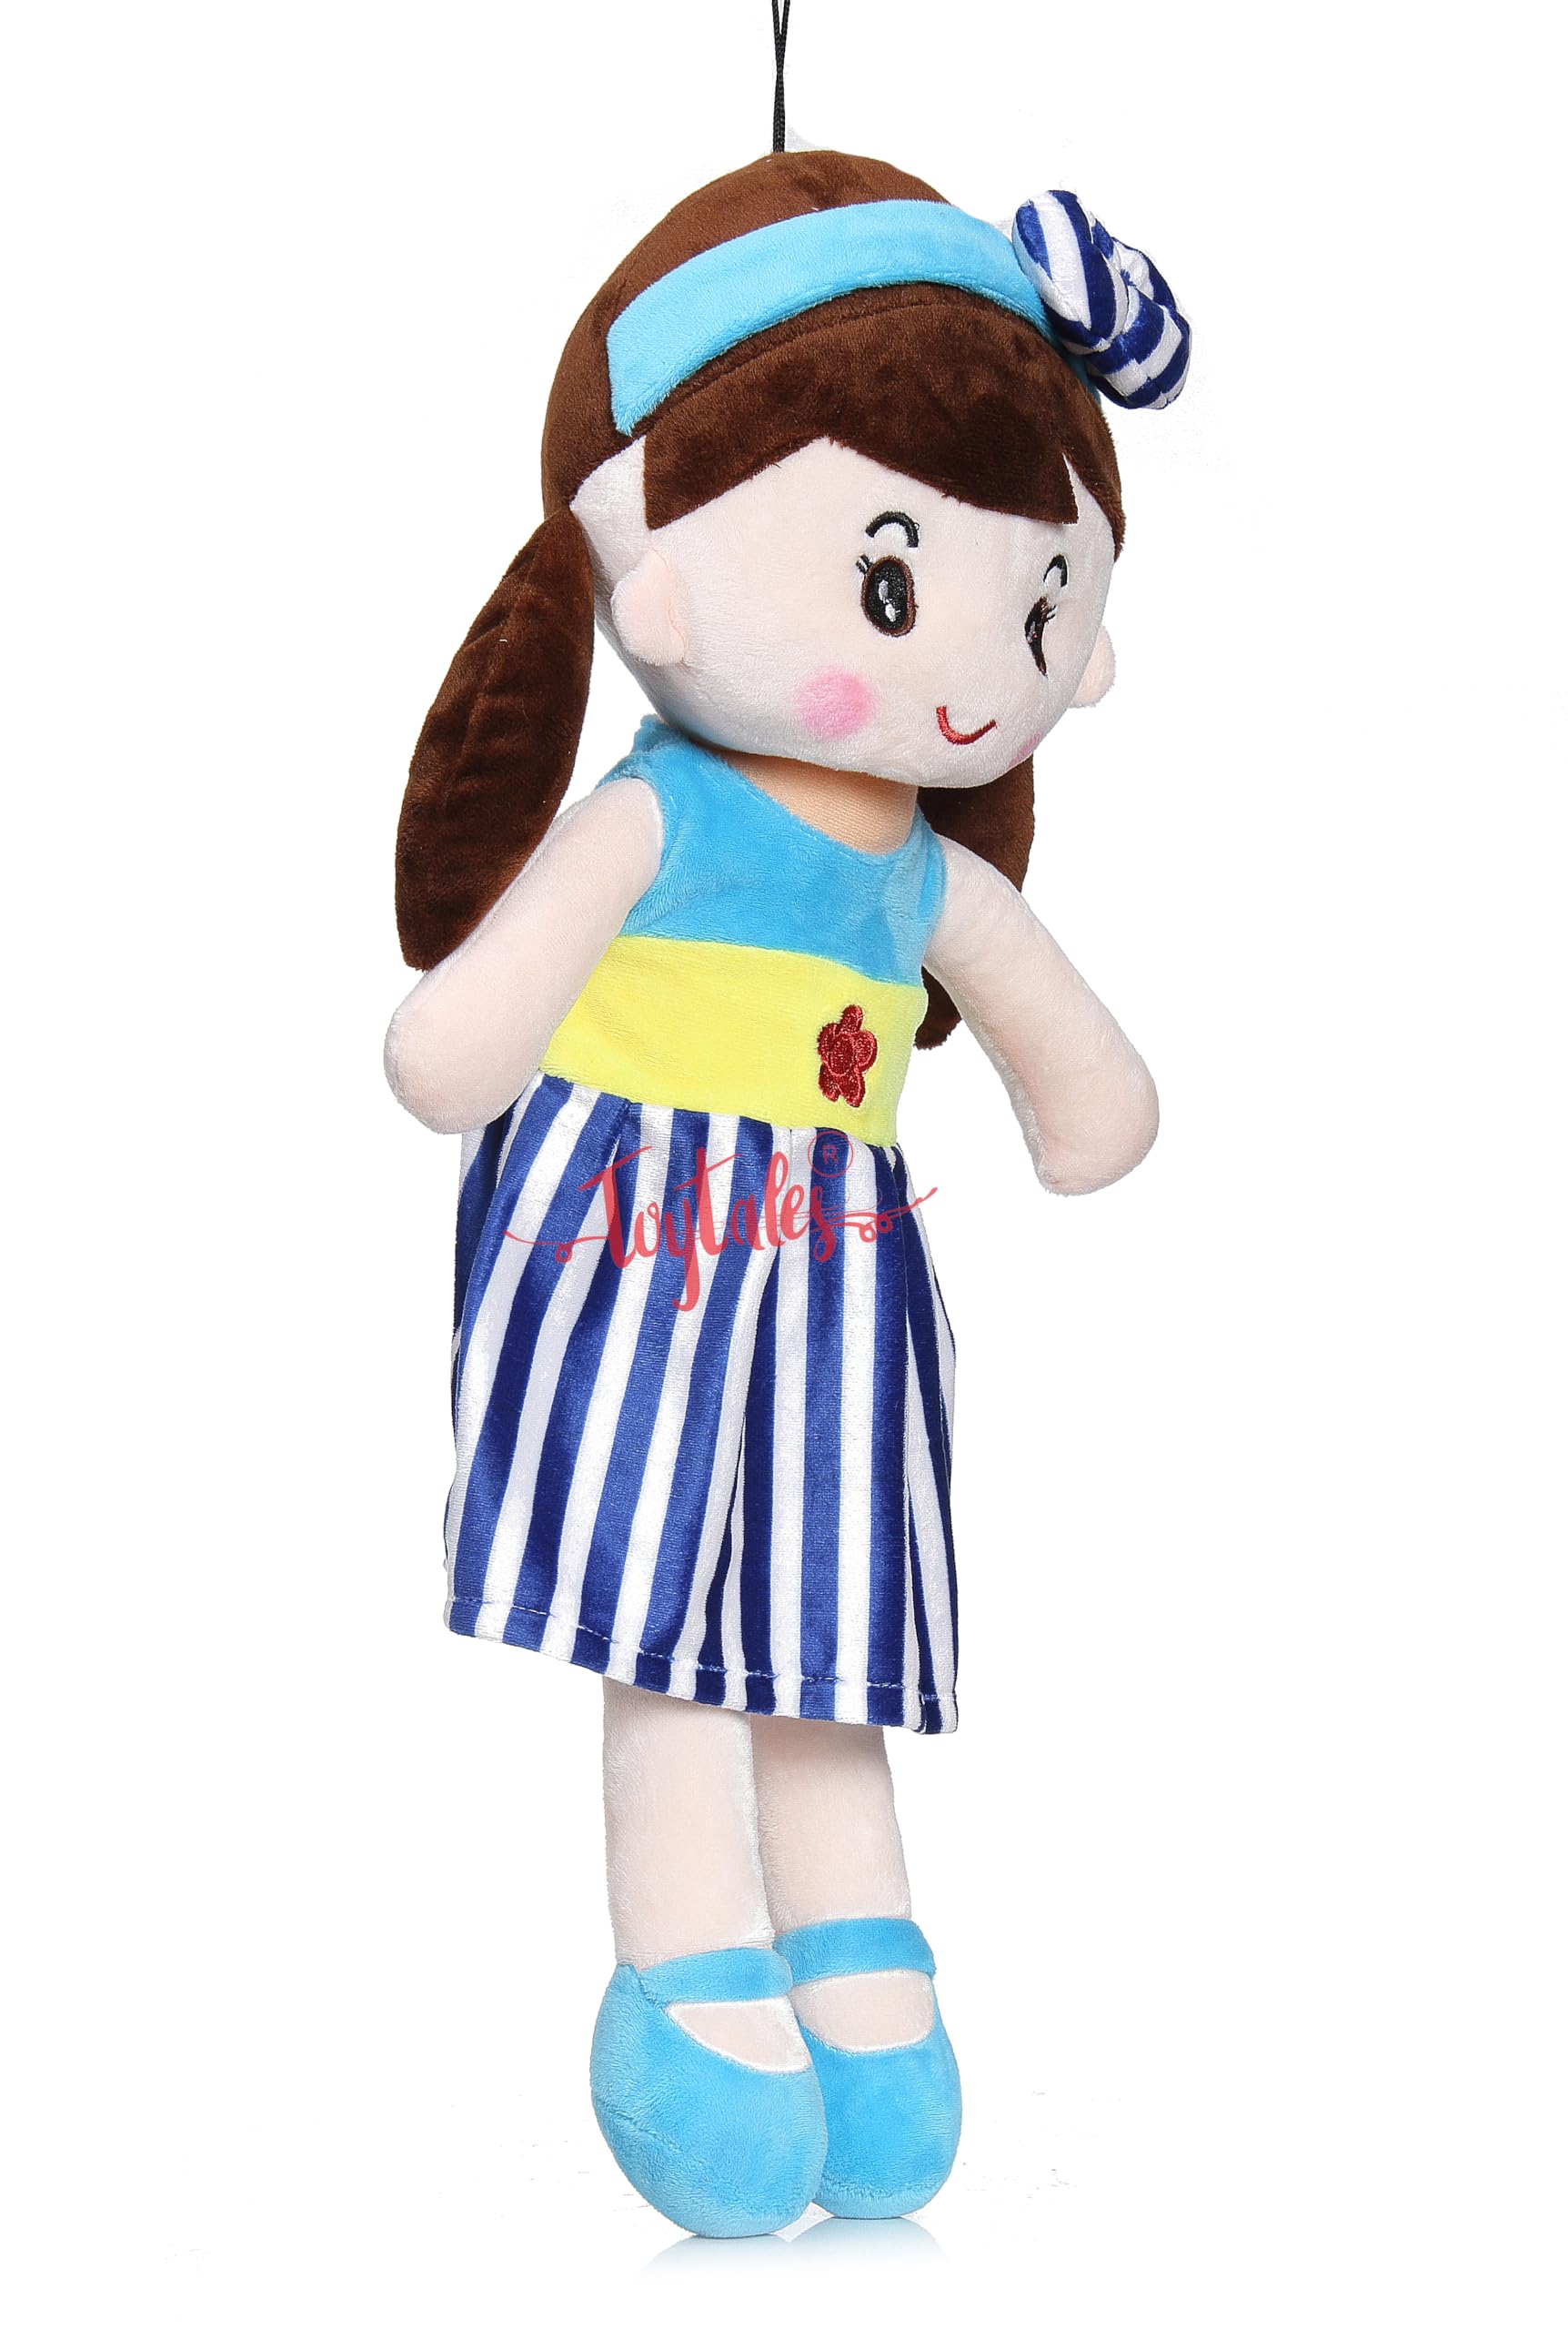 Cute Super Soft Stuffed Doll Big Size 80cm, Cuddly Squishy Dolls, Plush Toy for Baby Girls, Spark Imaginative Play, Safe & Fun Gift for Kids, Perfect for Playtime & Cuddling